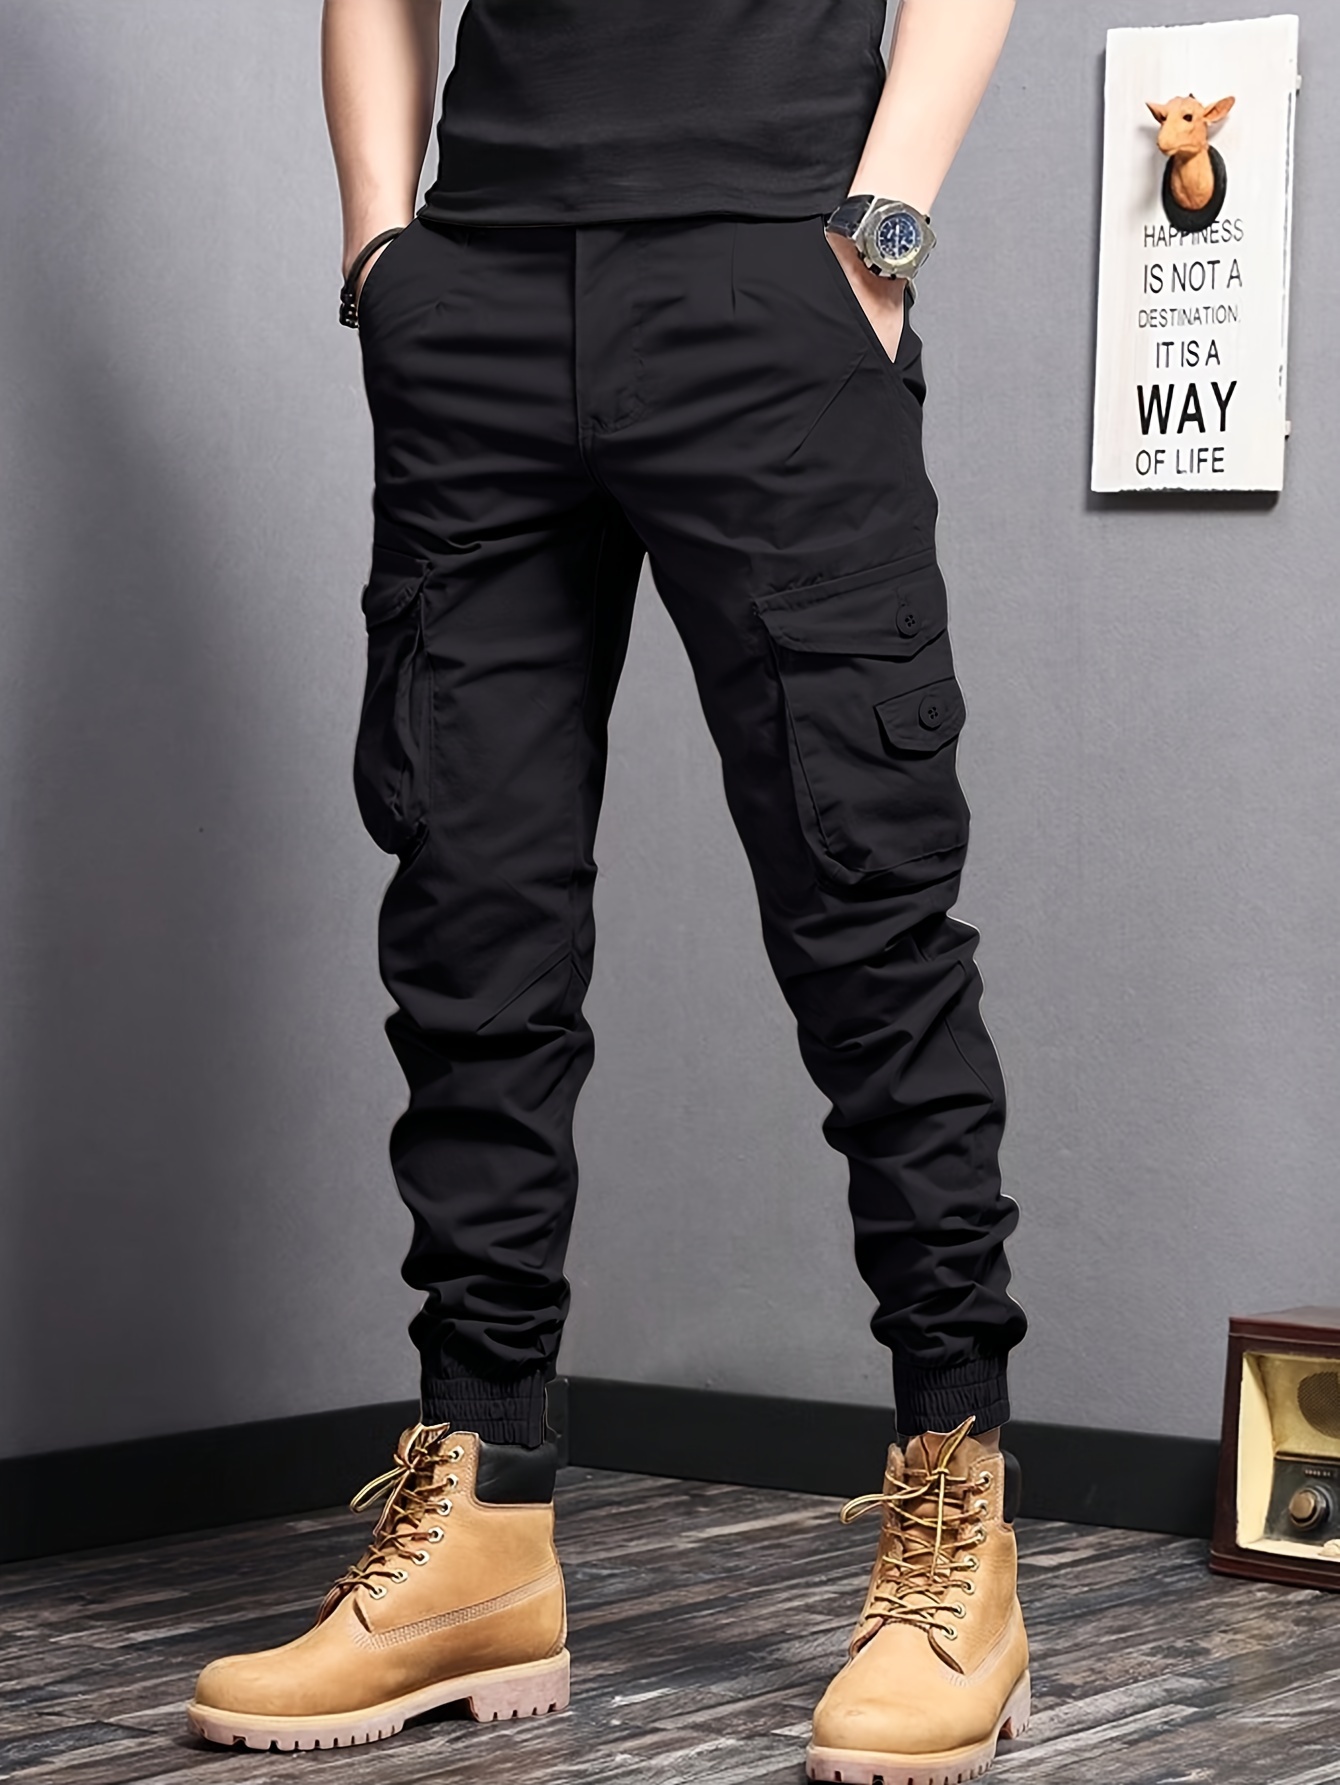 NEW VISION'' Tag Men's Cargo Pants With Flap Pockets, Loose Trendy  Overalls